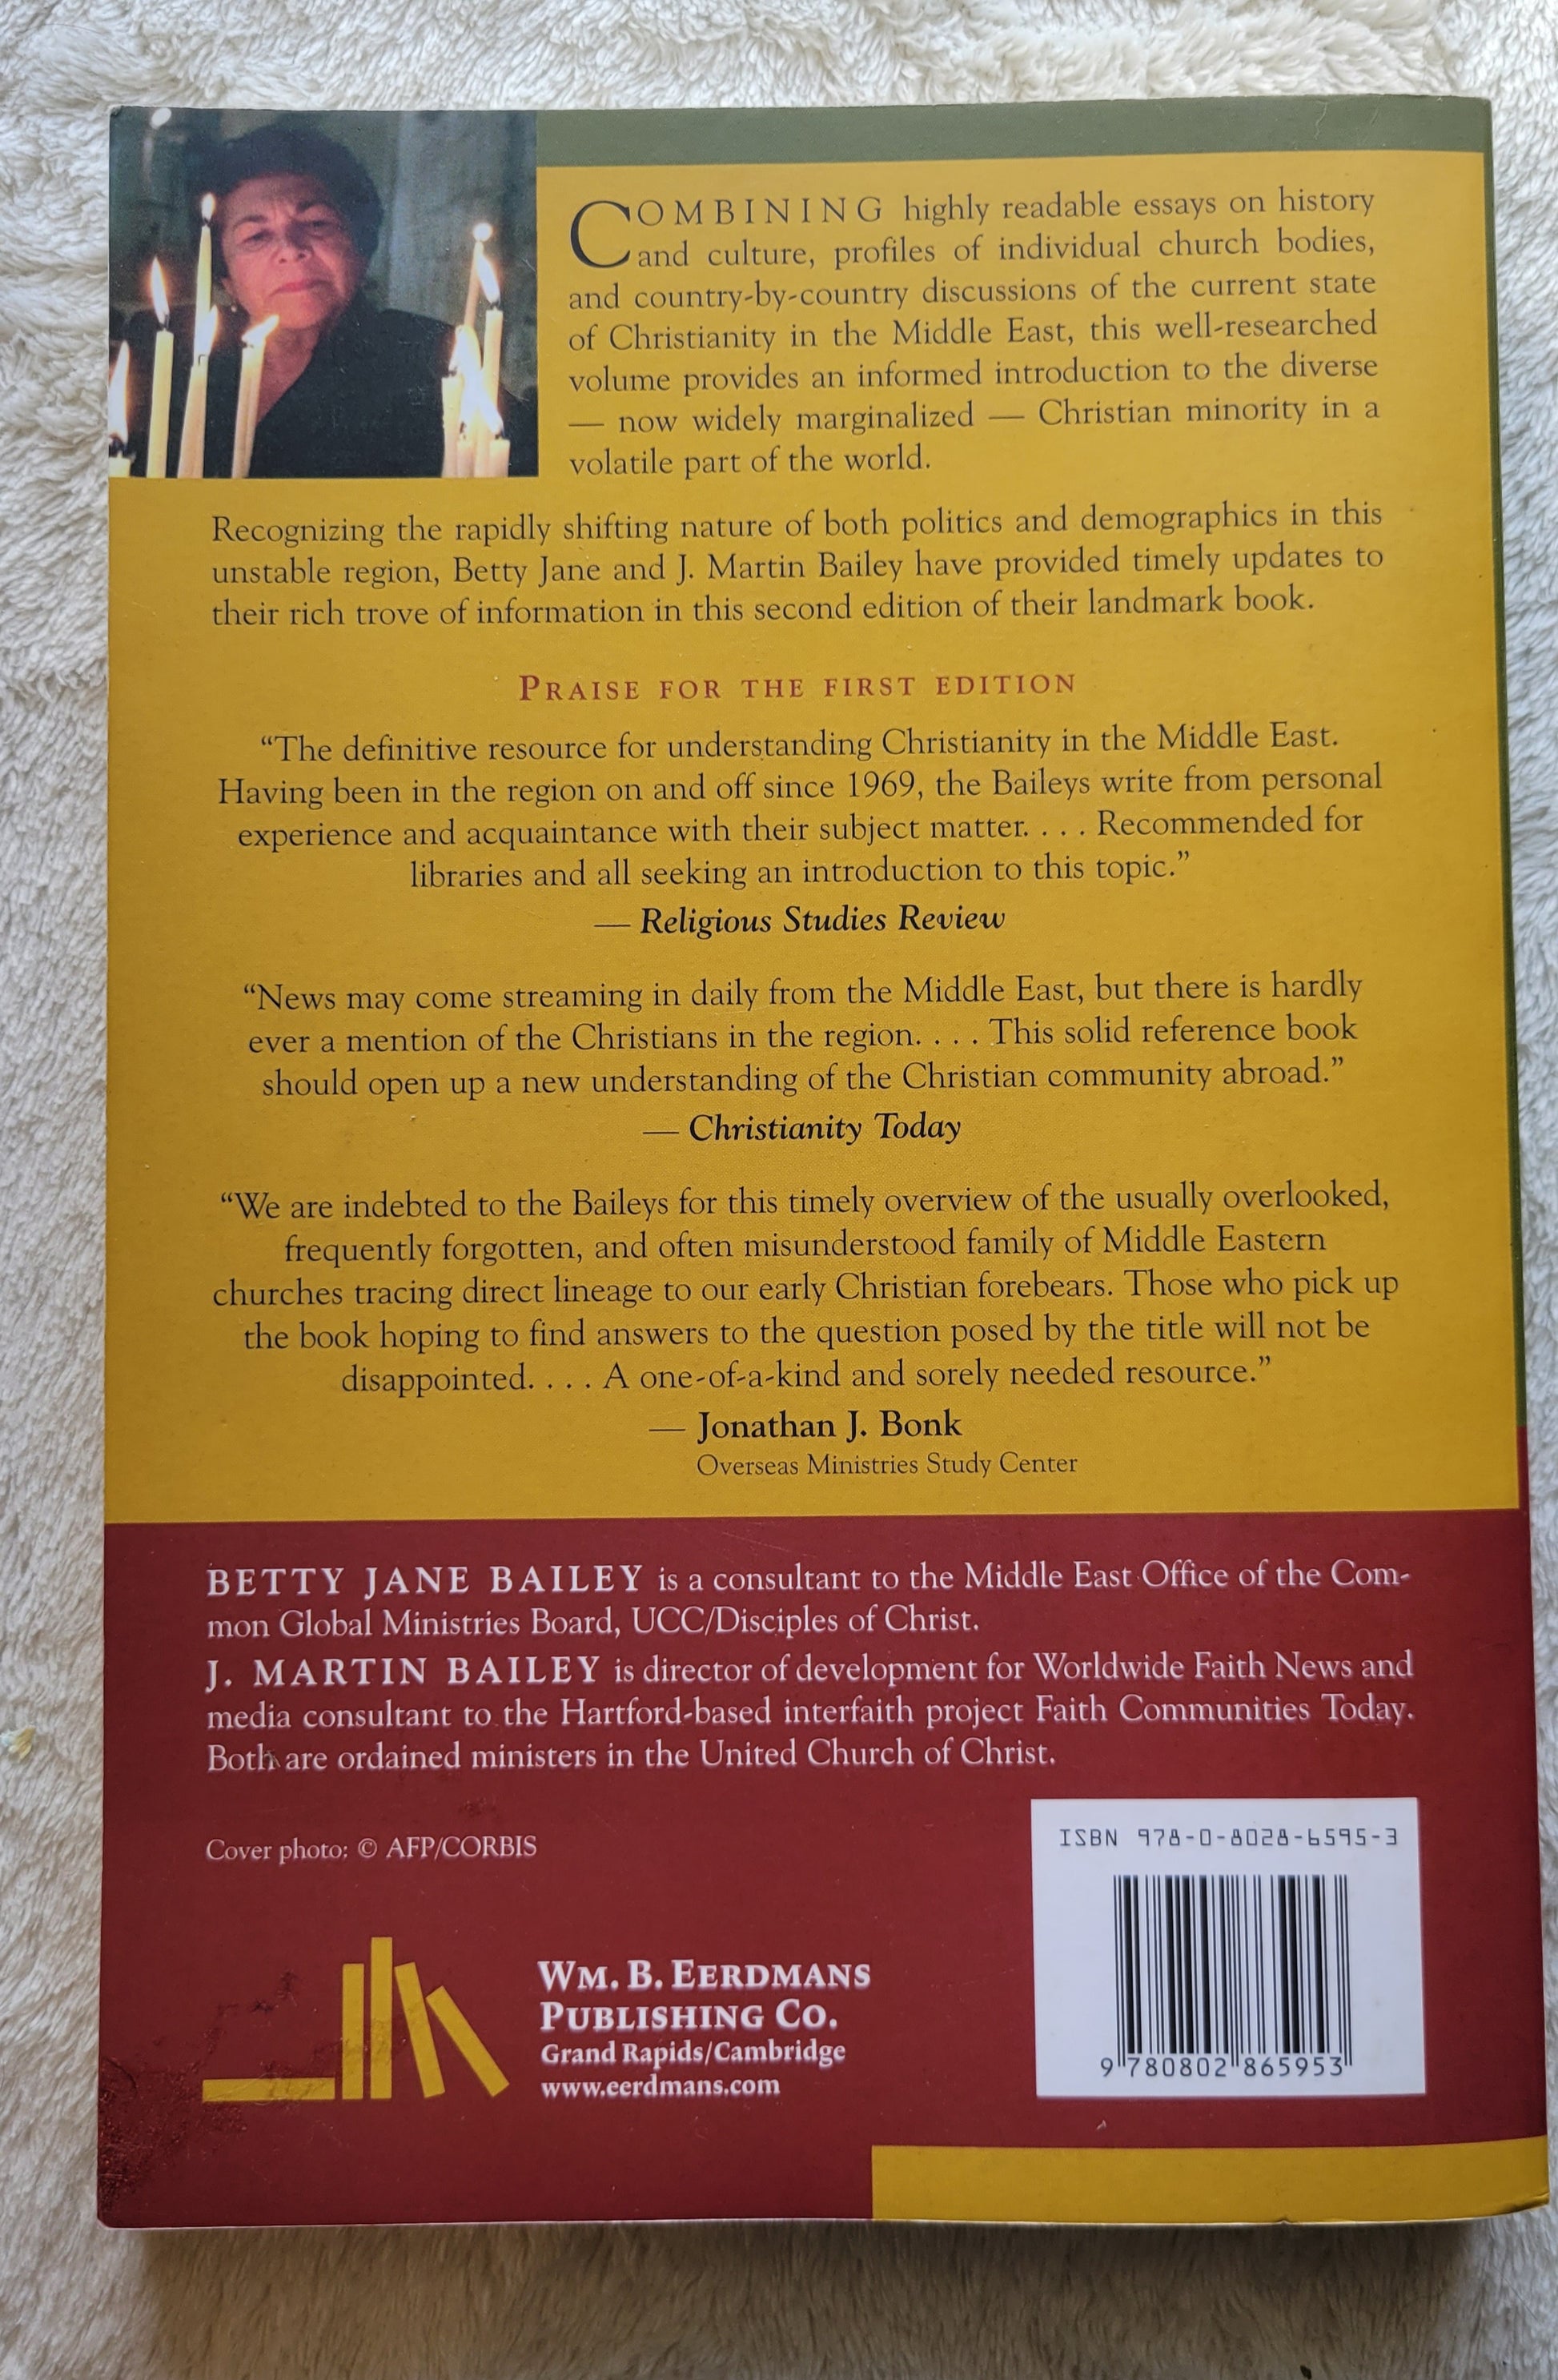 Used book for sale "Who Are the Christians in the Middle East?" Second Edition, by Betty Jane Bailey & J. Martin Bailey, published by Wm. B. Eerdmans Publishing Co. in 2010. Back cover.